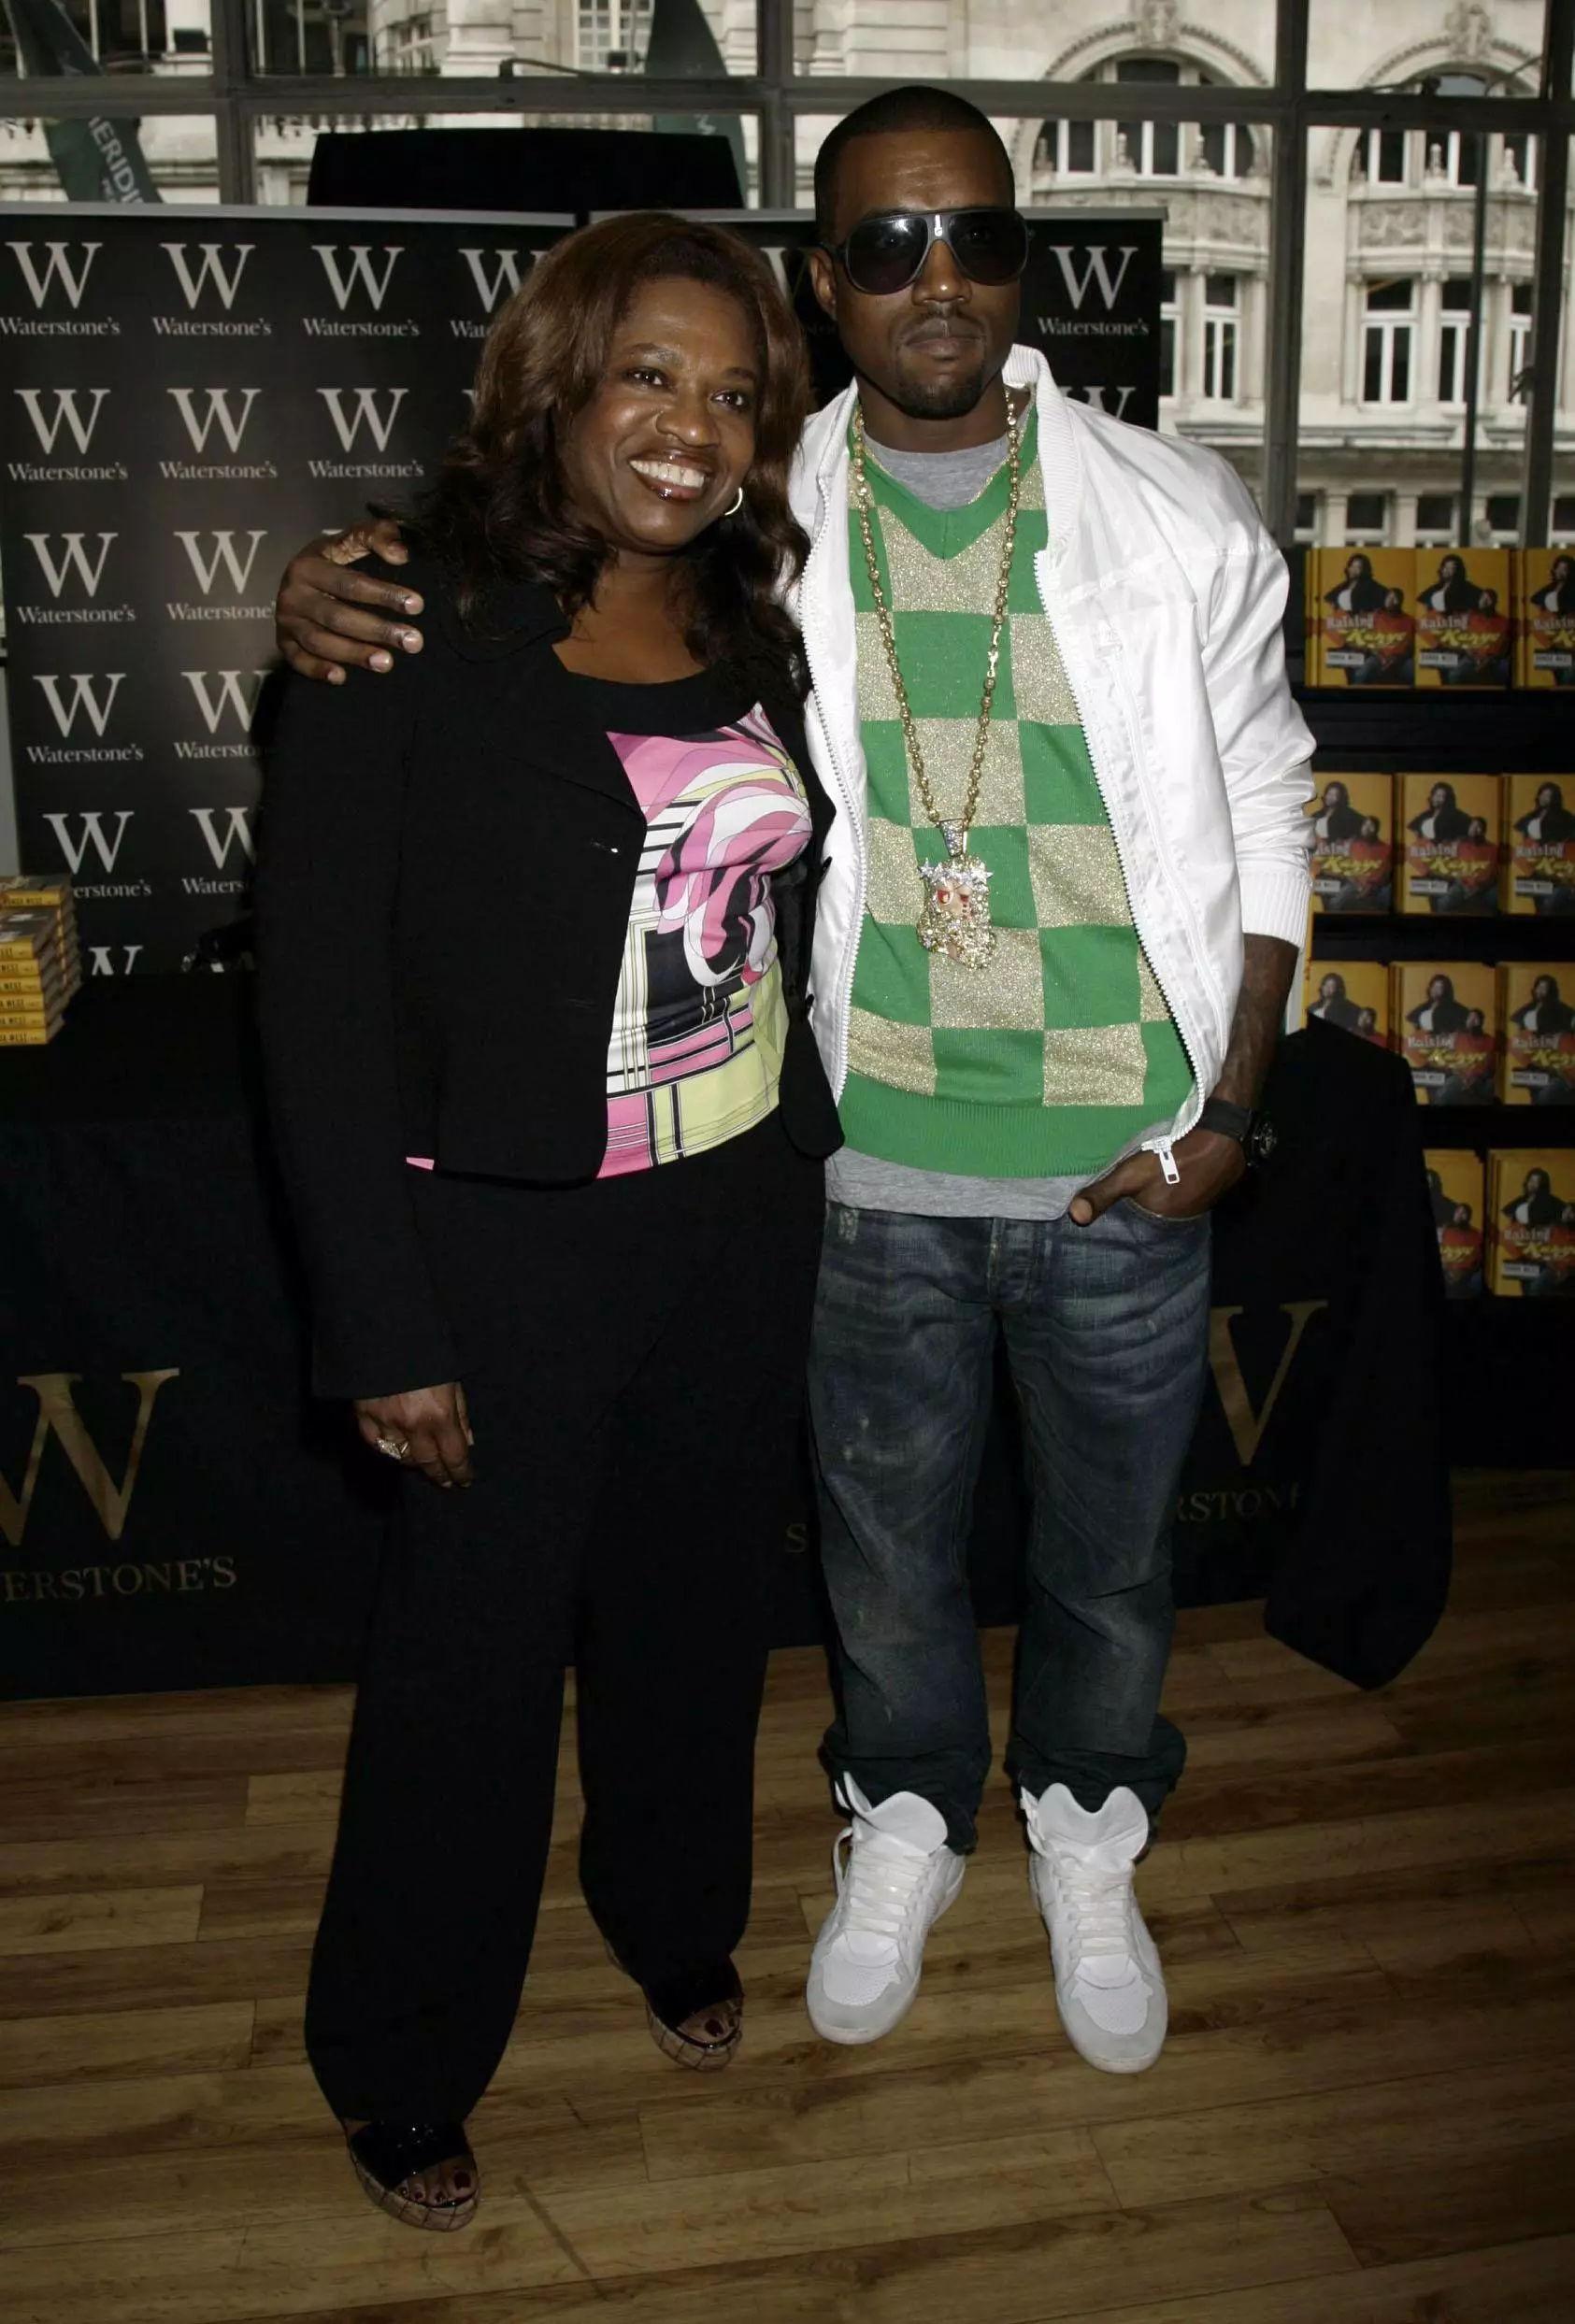 Kanye lived at the house with his mum Donda, who was a college professor.